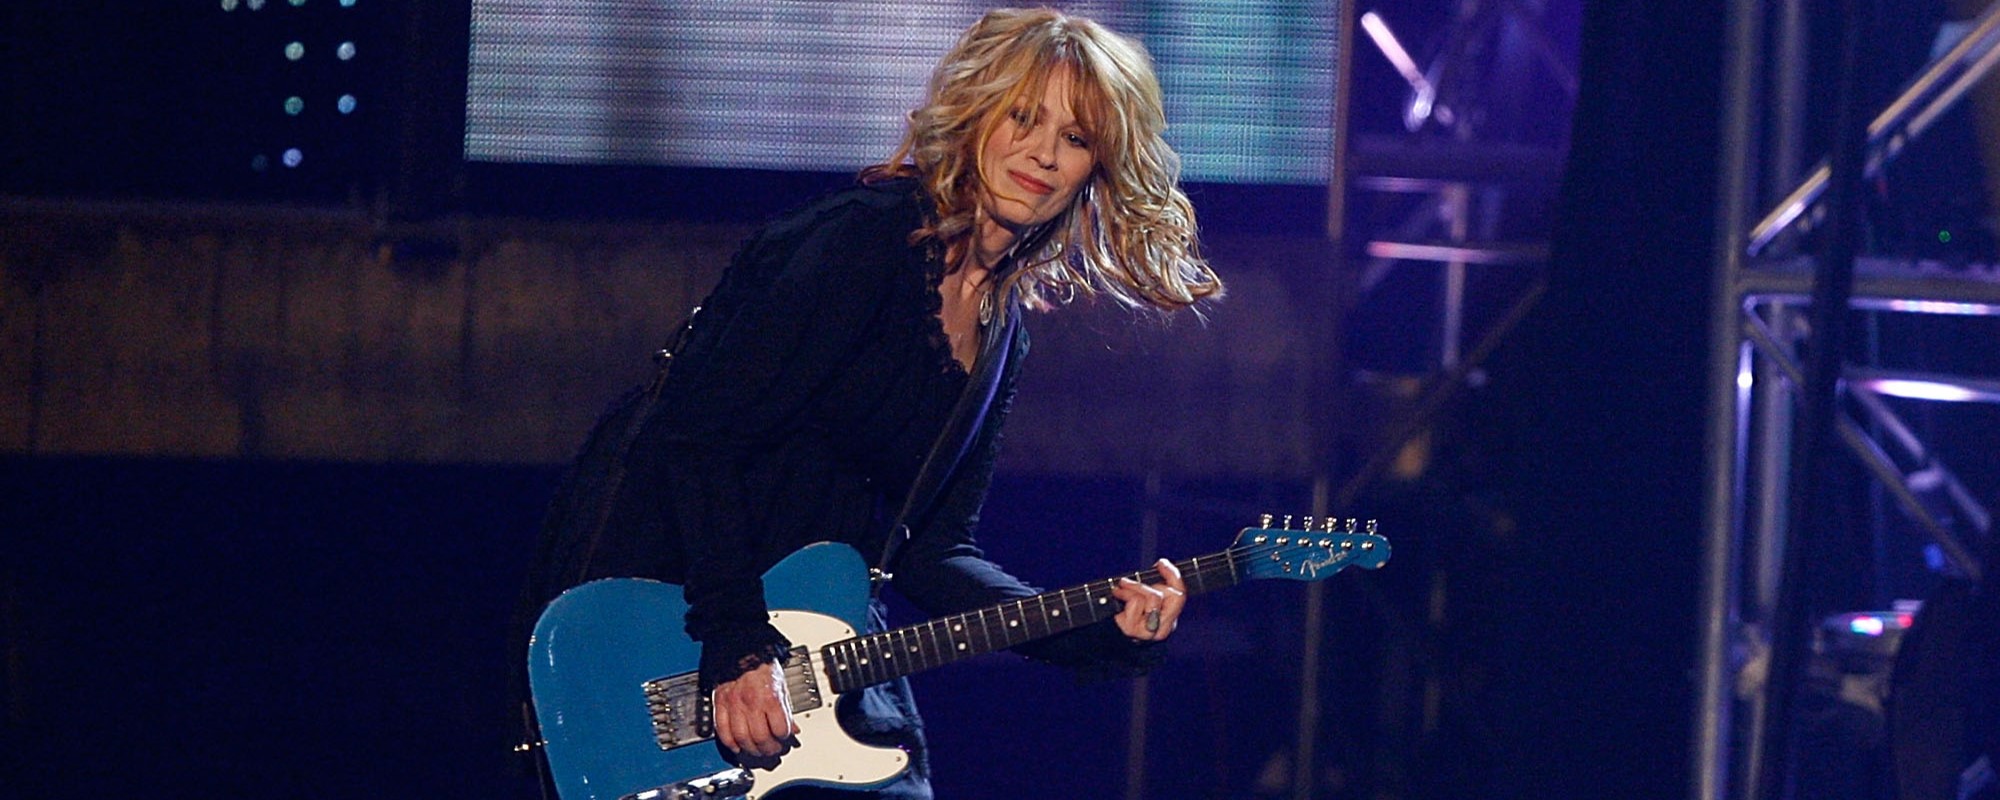 5 Fascinating Facts About Heart’s Nancy Wilson in Honor of Her 70th Birthday